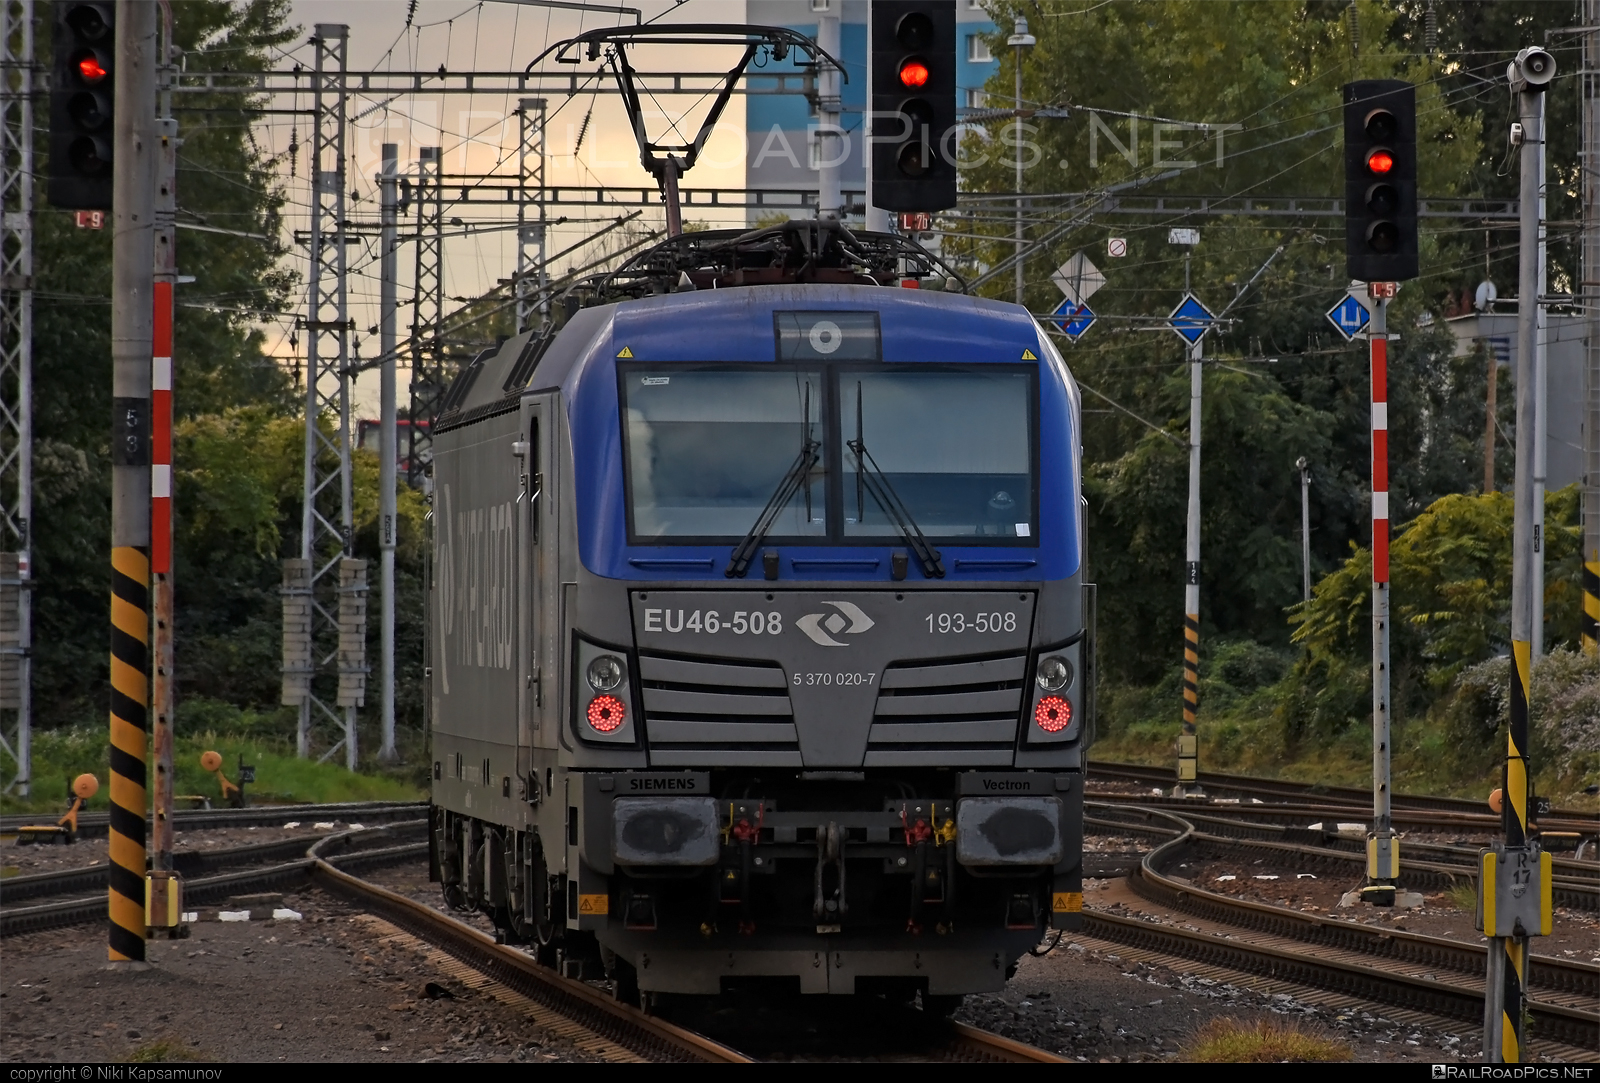 Siemens Vectron MS - 193-508 operated by PKP CARGO INTERNATIONAL a.s. #pkp #pkpcargo #pkpcargointernational #pkpcargointernationalas #pkpcargospolkaakcyjna #siemens #siemensVectron #siemensVectronMS #vectron #vectronMS